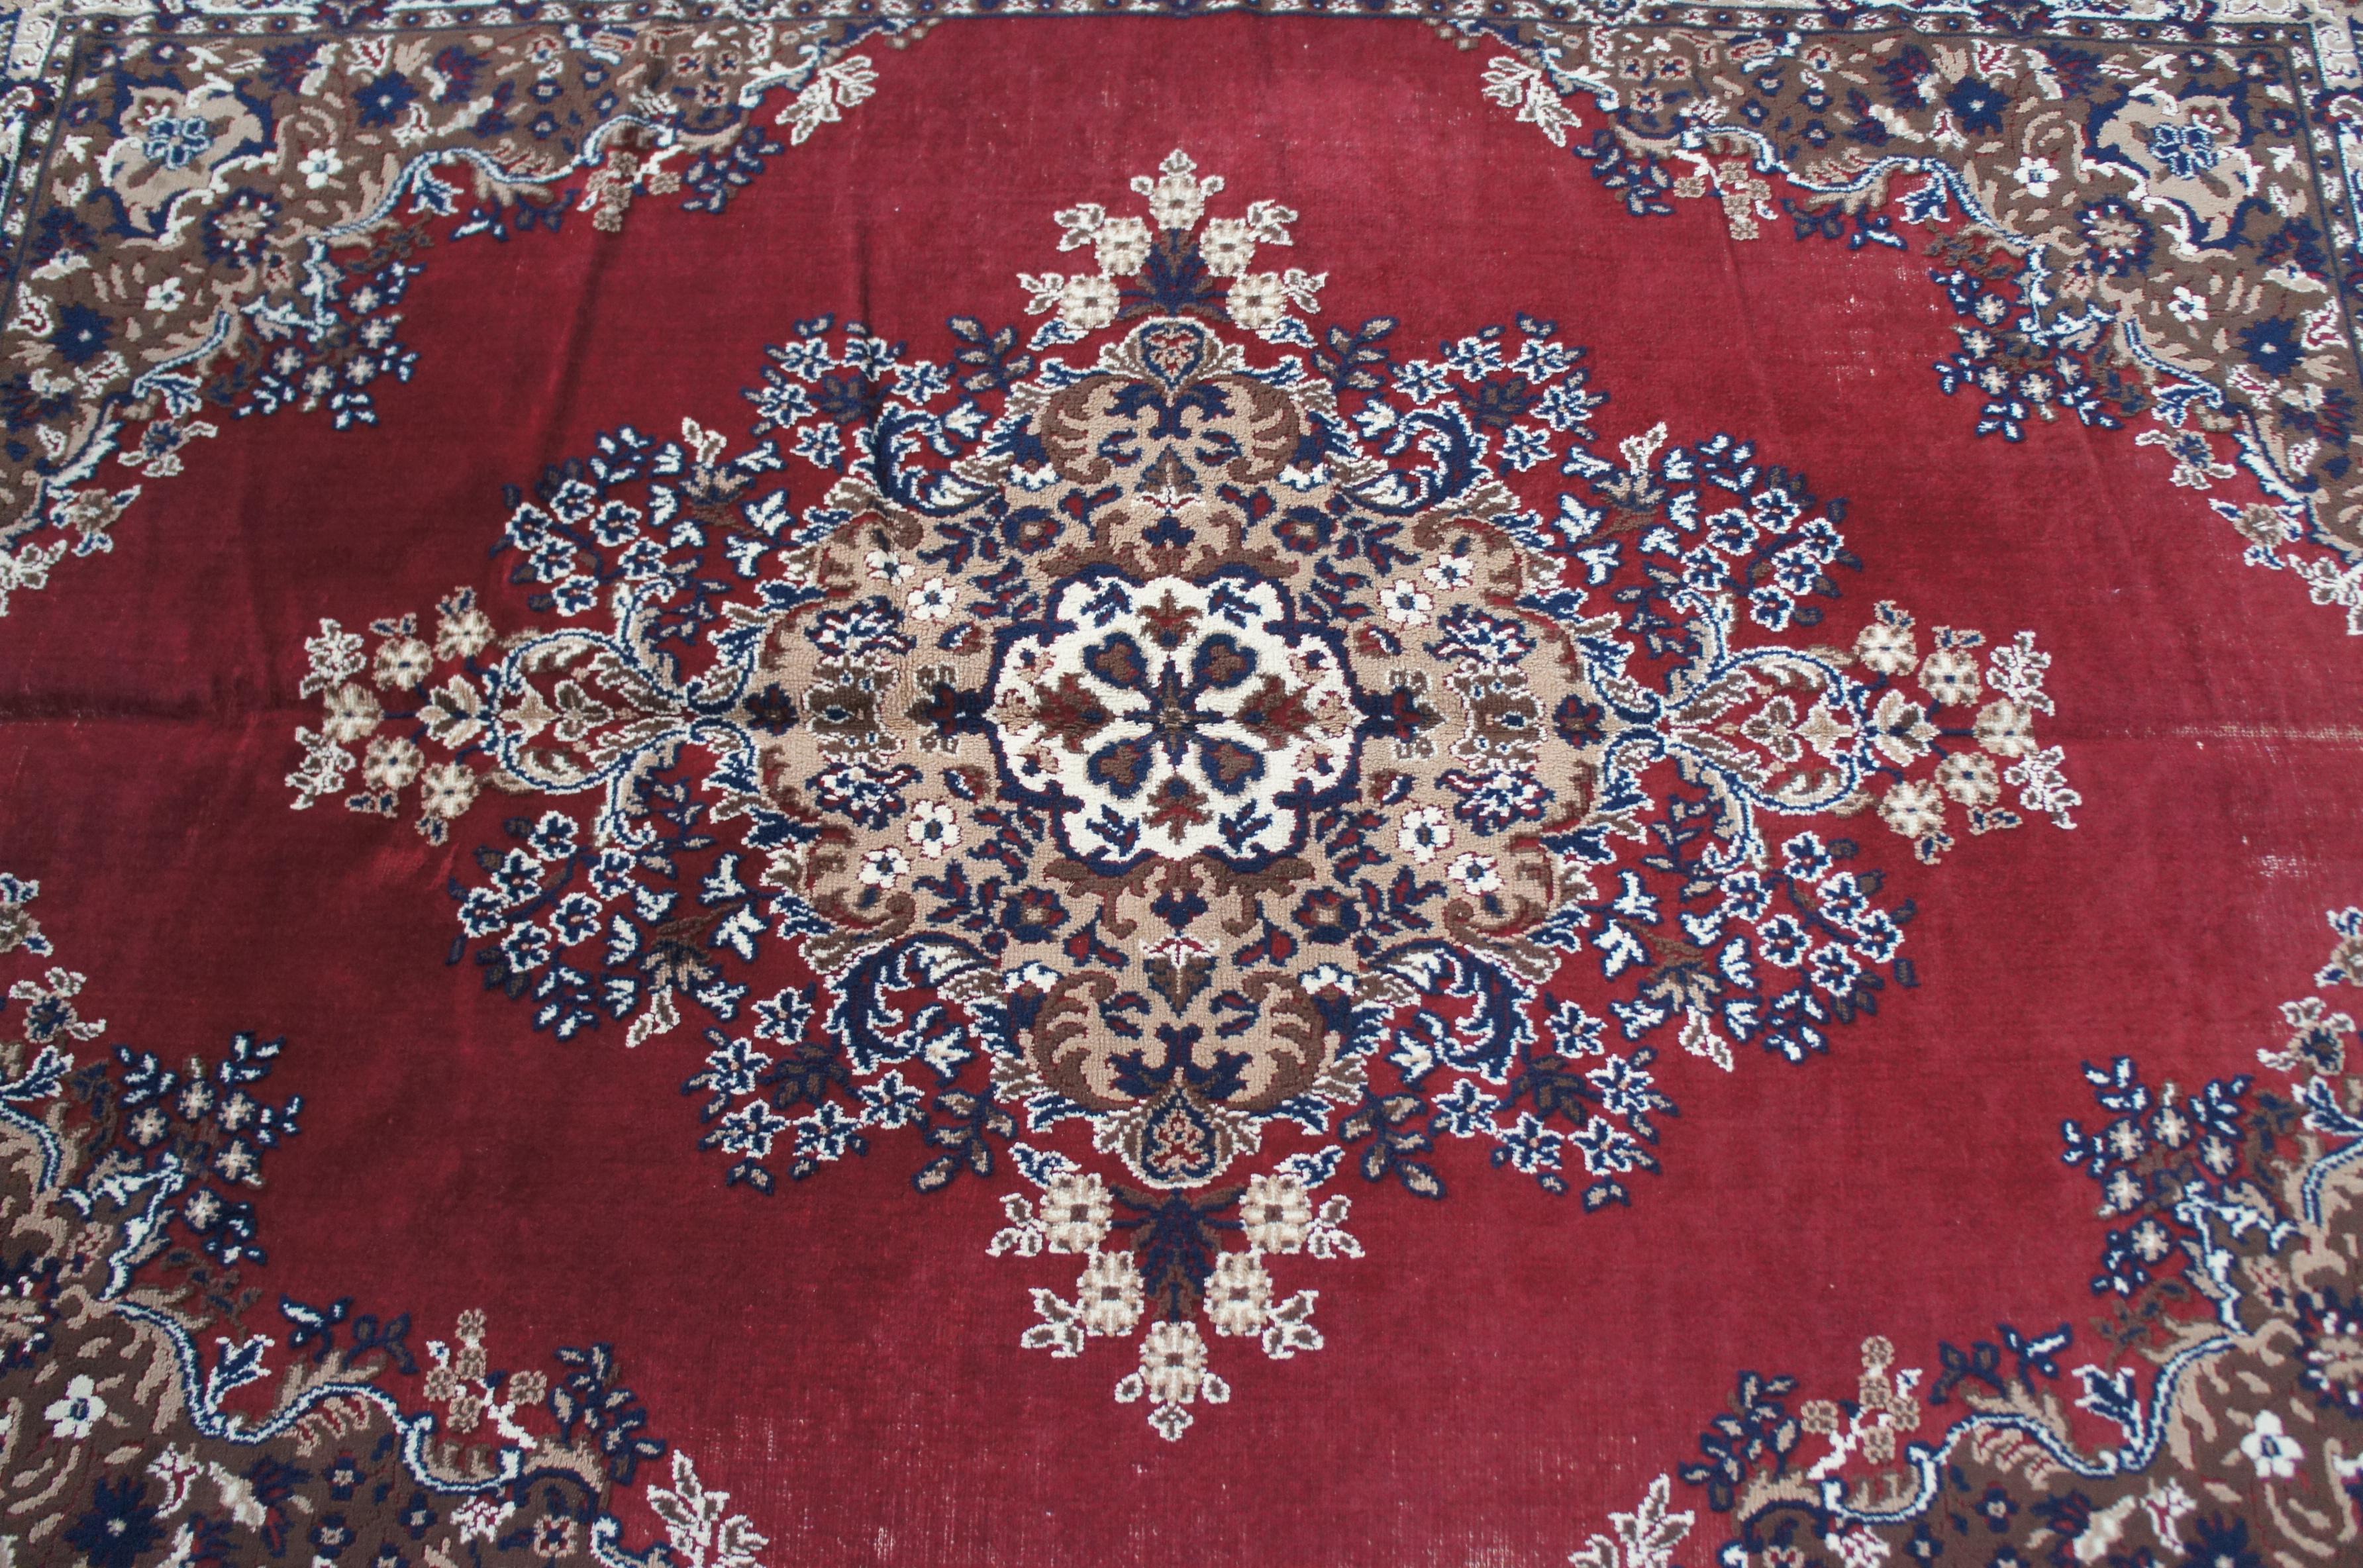 Beaulieu of America Wolefin V 100% Yarn Red Medallion Floral Area Rug Carpet 11' In Good Condition For Sale In Dayton, OH